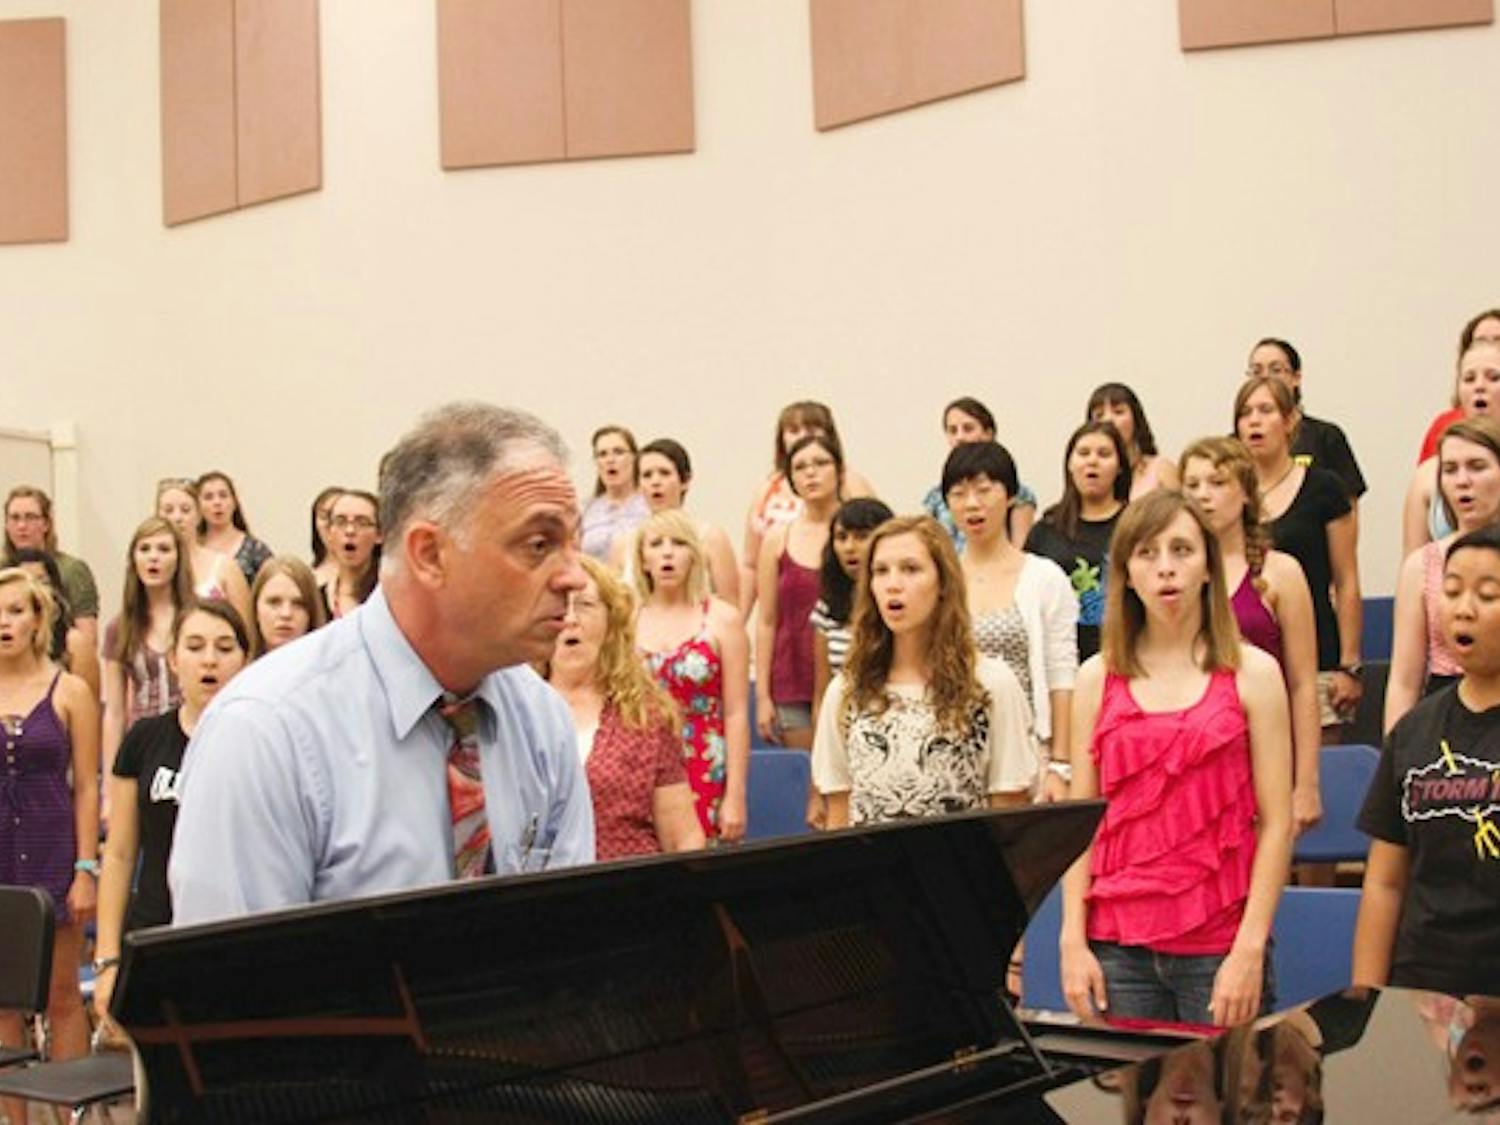 SING IT OUT: Students in the Barrett Honors College choir rehearsed for the first time Monday evening in the Gammage Auditorium, led by David Schildkret. (Photo by Lisa Bartoli)